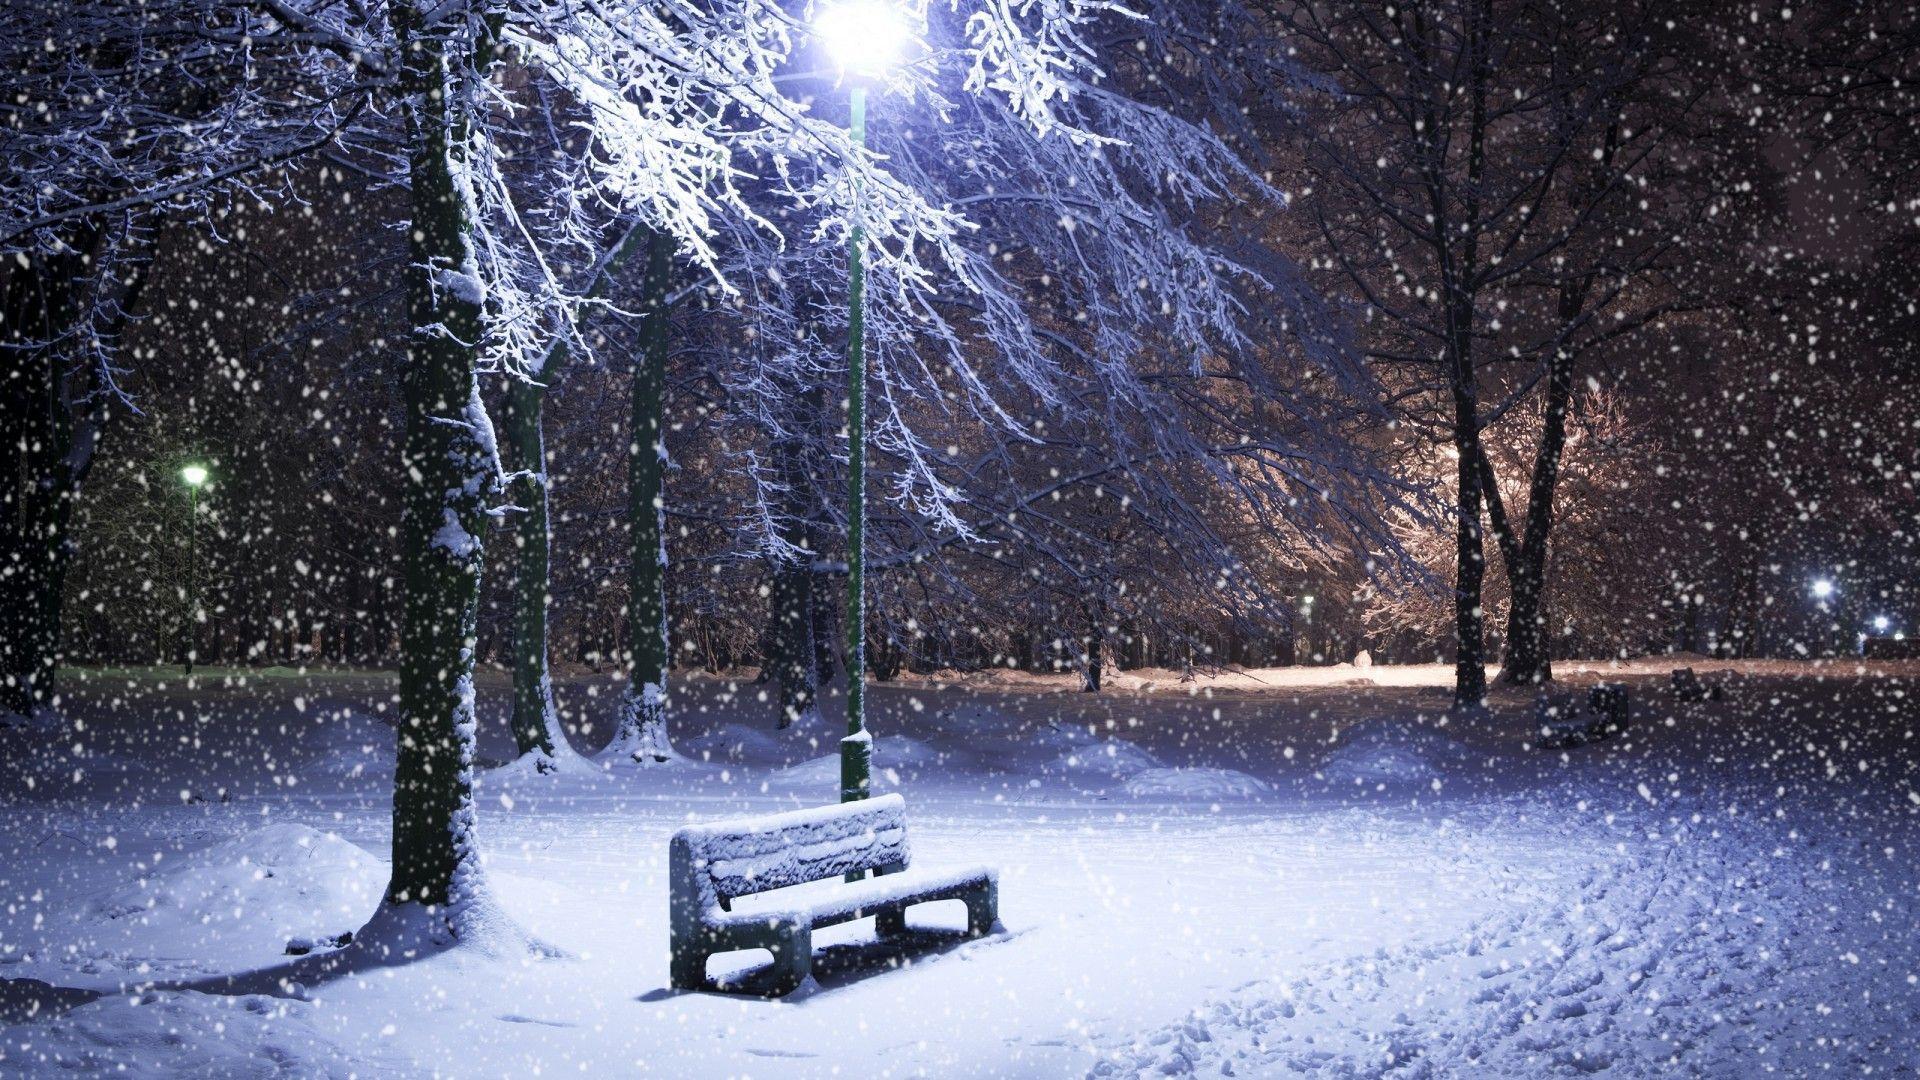 1920X1080 Hd Snow Wallpapers